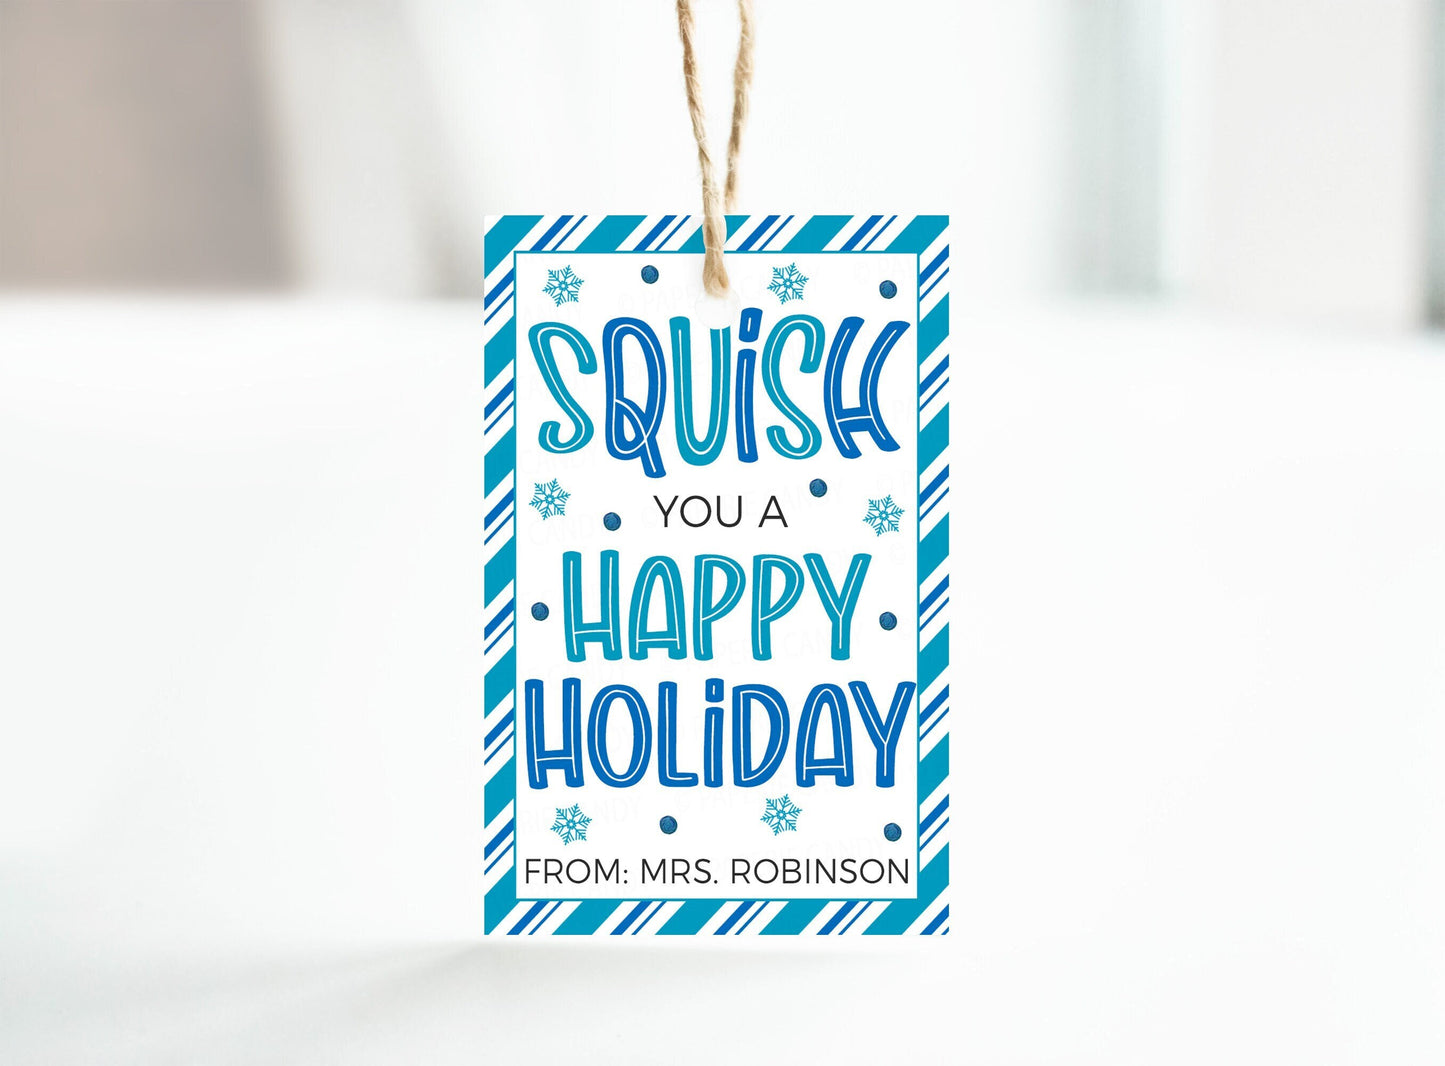 Holiday Squishies Gift Tag, Squish You A Happy Holiday, Gift For Classmates Students, Stocking Stuffer Squishy Squeeze Toy, Printable